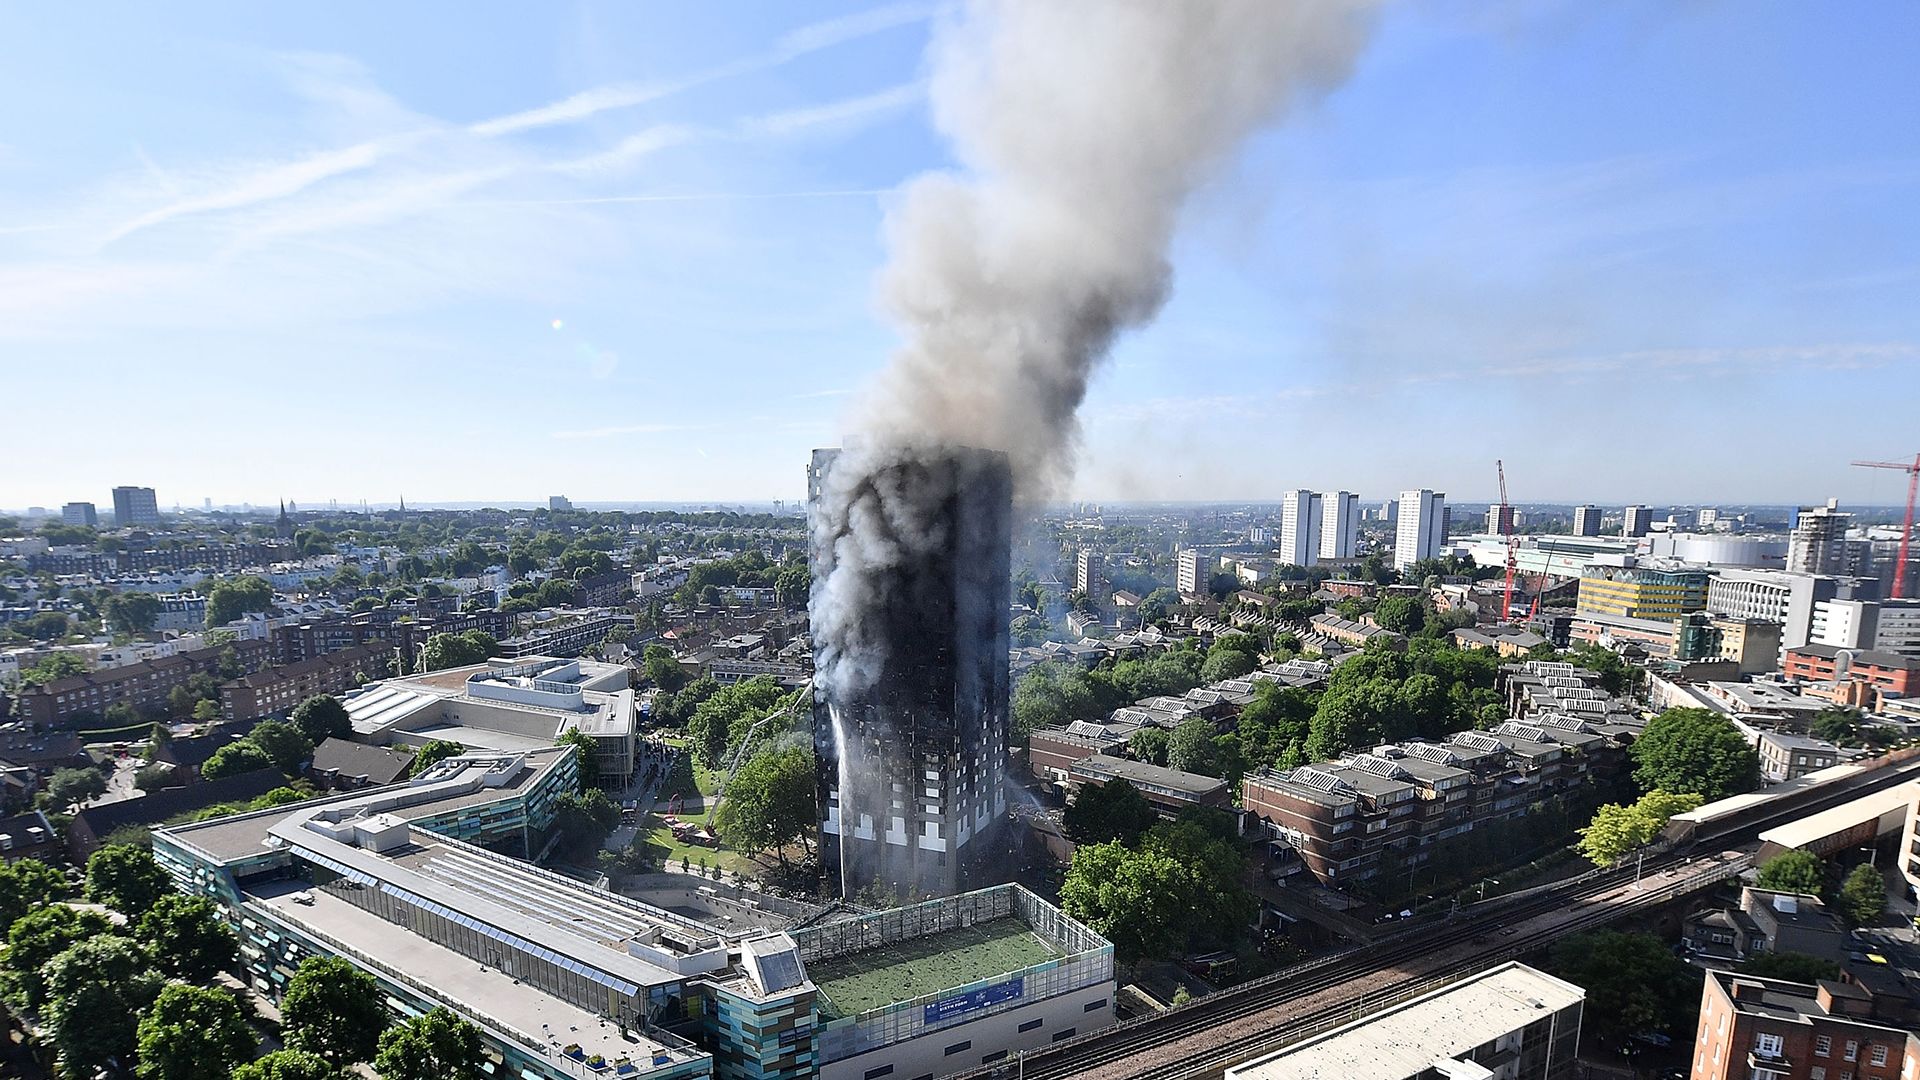 Grenfell Tower. This is from Disasters Engineered. [Photo of the day - December 2021]